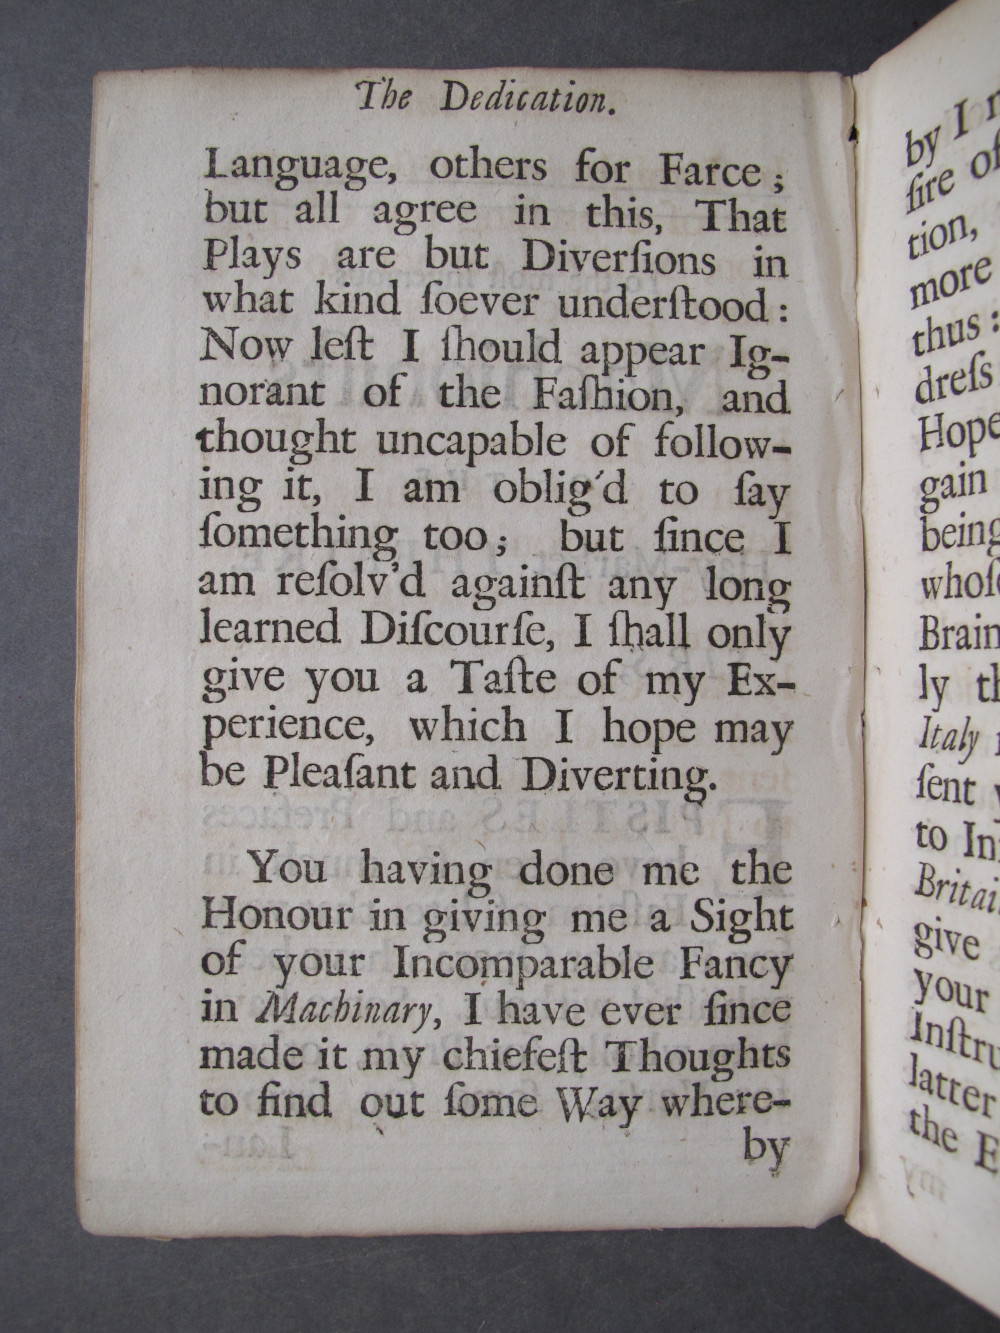 Folio A3 verso, text: 
The Dedication.

Language, others for Farce;
but all agree in this, That
Plays are but Diversions in
what kind soever understood:
Now lest I should appear Ig-
norant of the Fashion, and
thought uncapable of follow-
ing it, I am oblig'd to say
something too; but since I
am resolv'd against any long
learned Discourse, I shall only
give you a Taste of my Ex-
perience, which I hope may
be Pleasant and Diverting.

You having done me the
Honour in giving me a Sight
of your Incomparable Fancy
in Machinary, I have ever since
made it my chiefest Thoughts
to find out some Way where-

by

